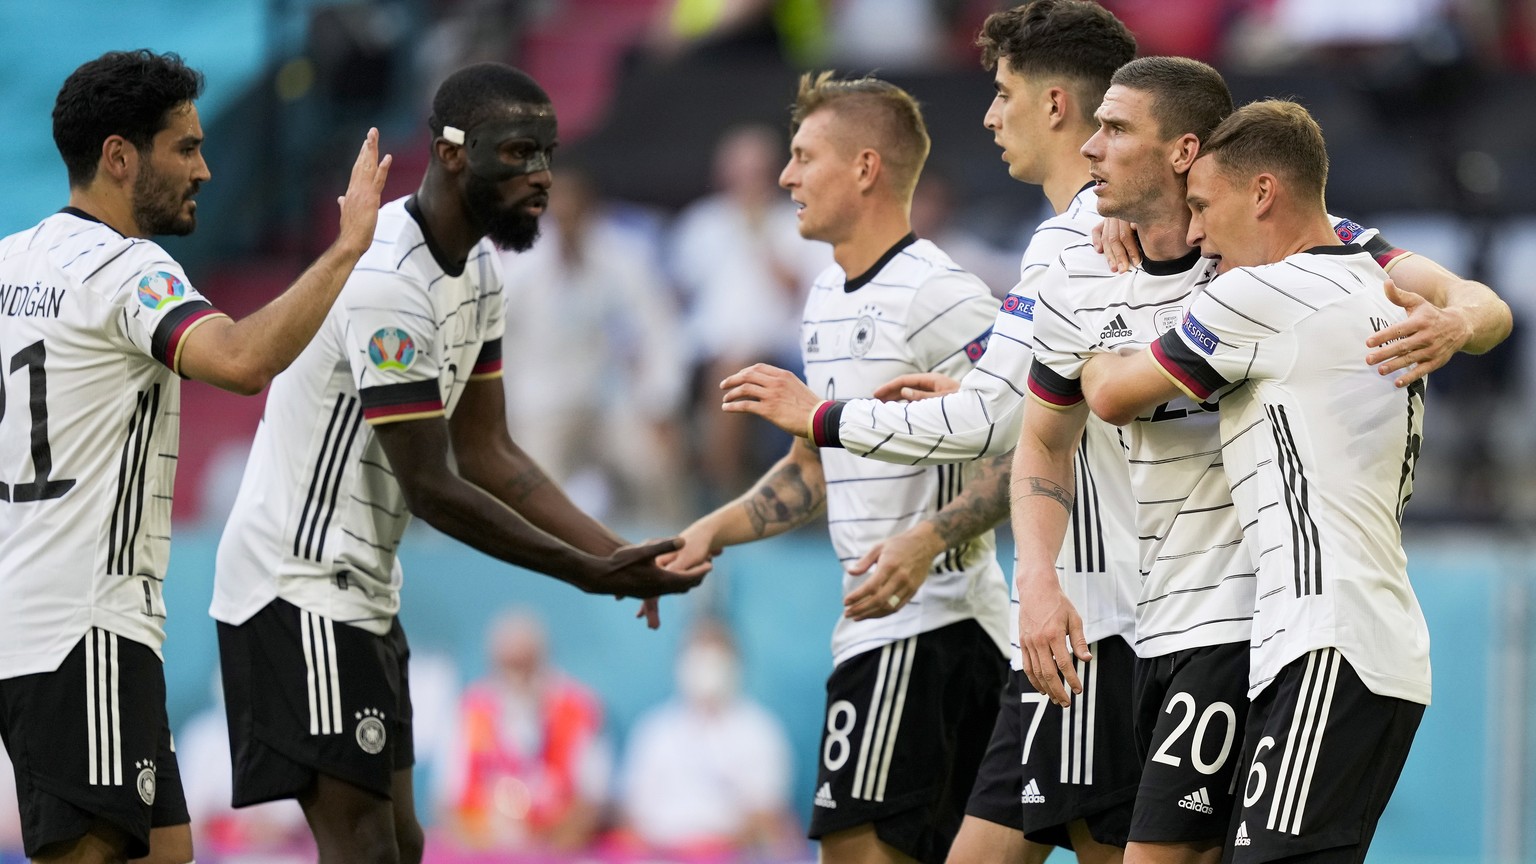 epa09286466 Germany players celebrate a goal against Portugal during the UEFA EURO 2020 group F preliminary round soccer match between Portugal and Germany in Munich, Germany, 19 June 2021. EPA/HUGO D ...